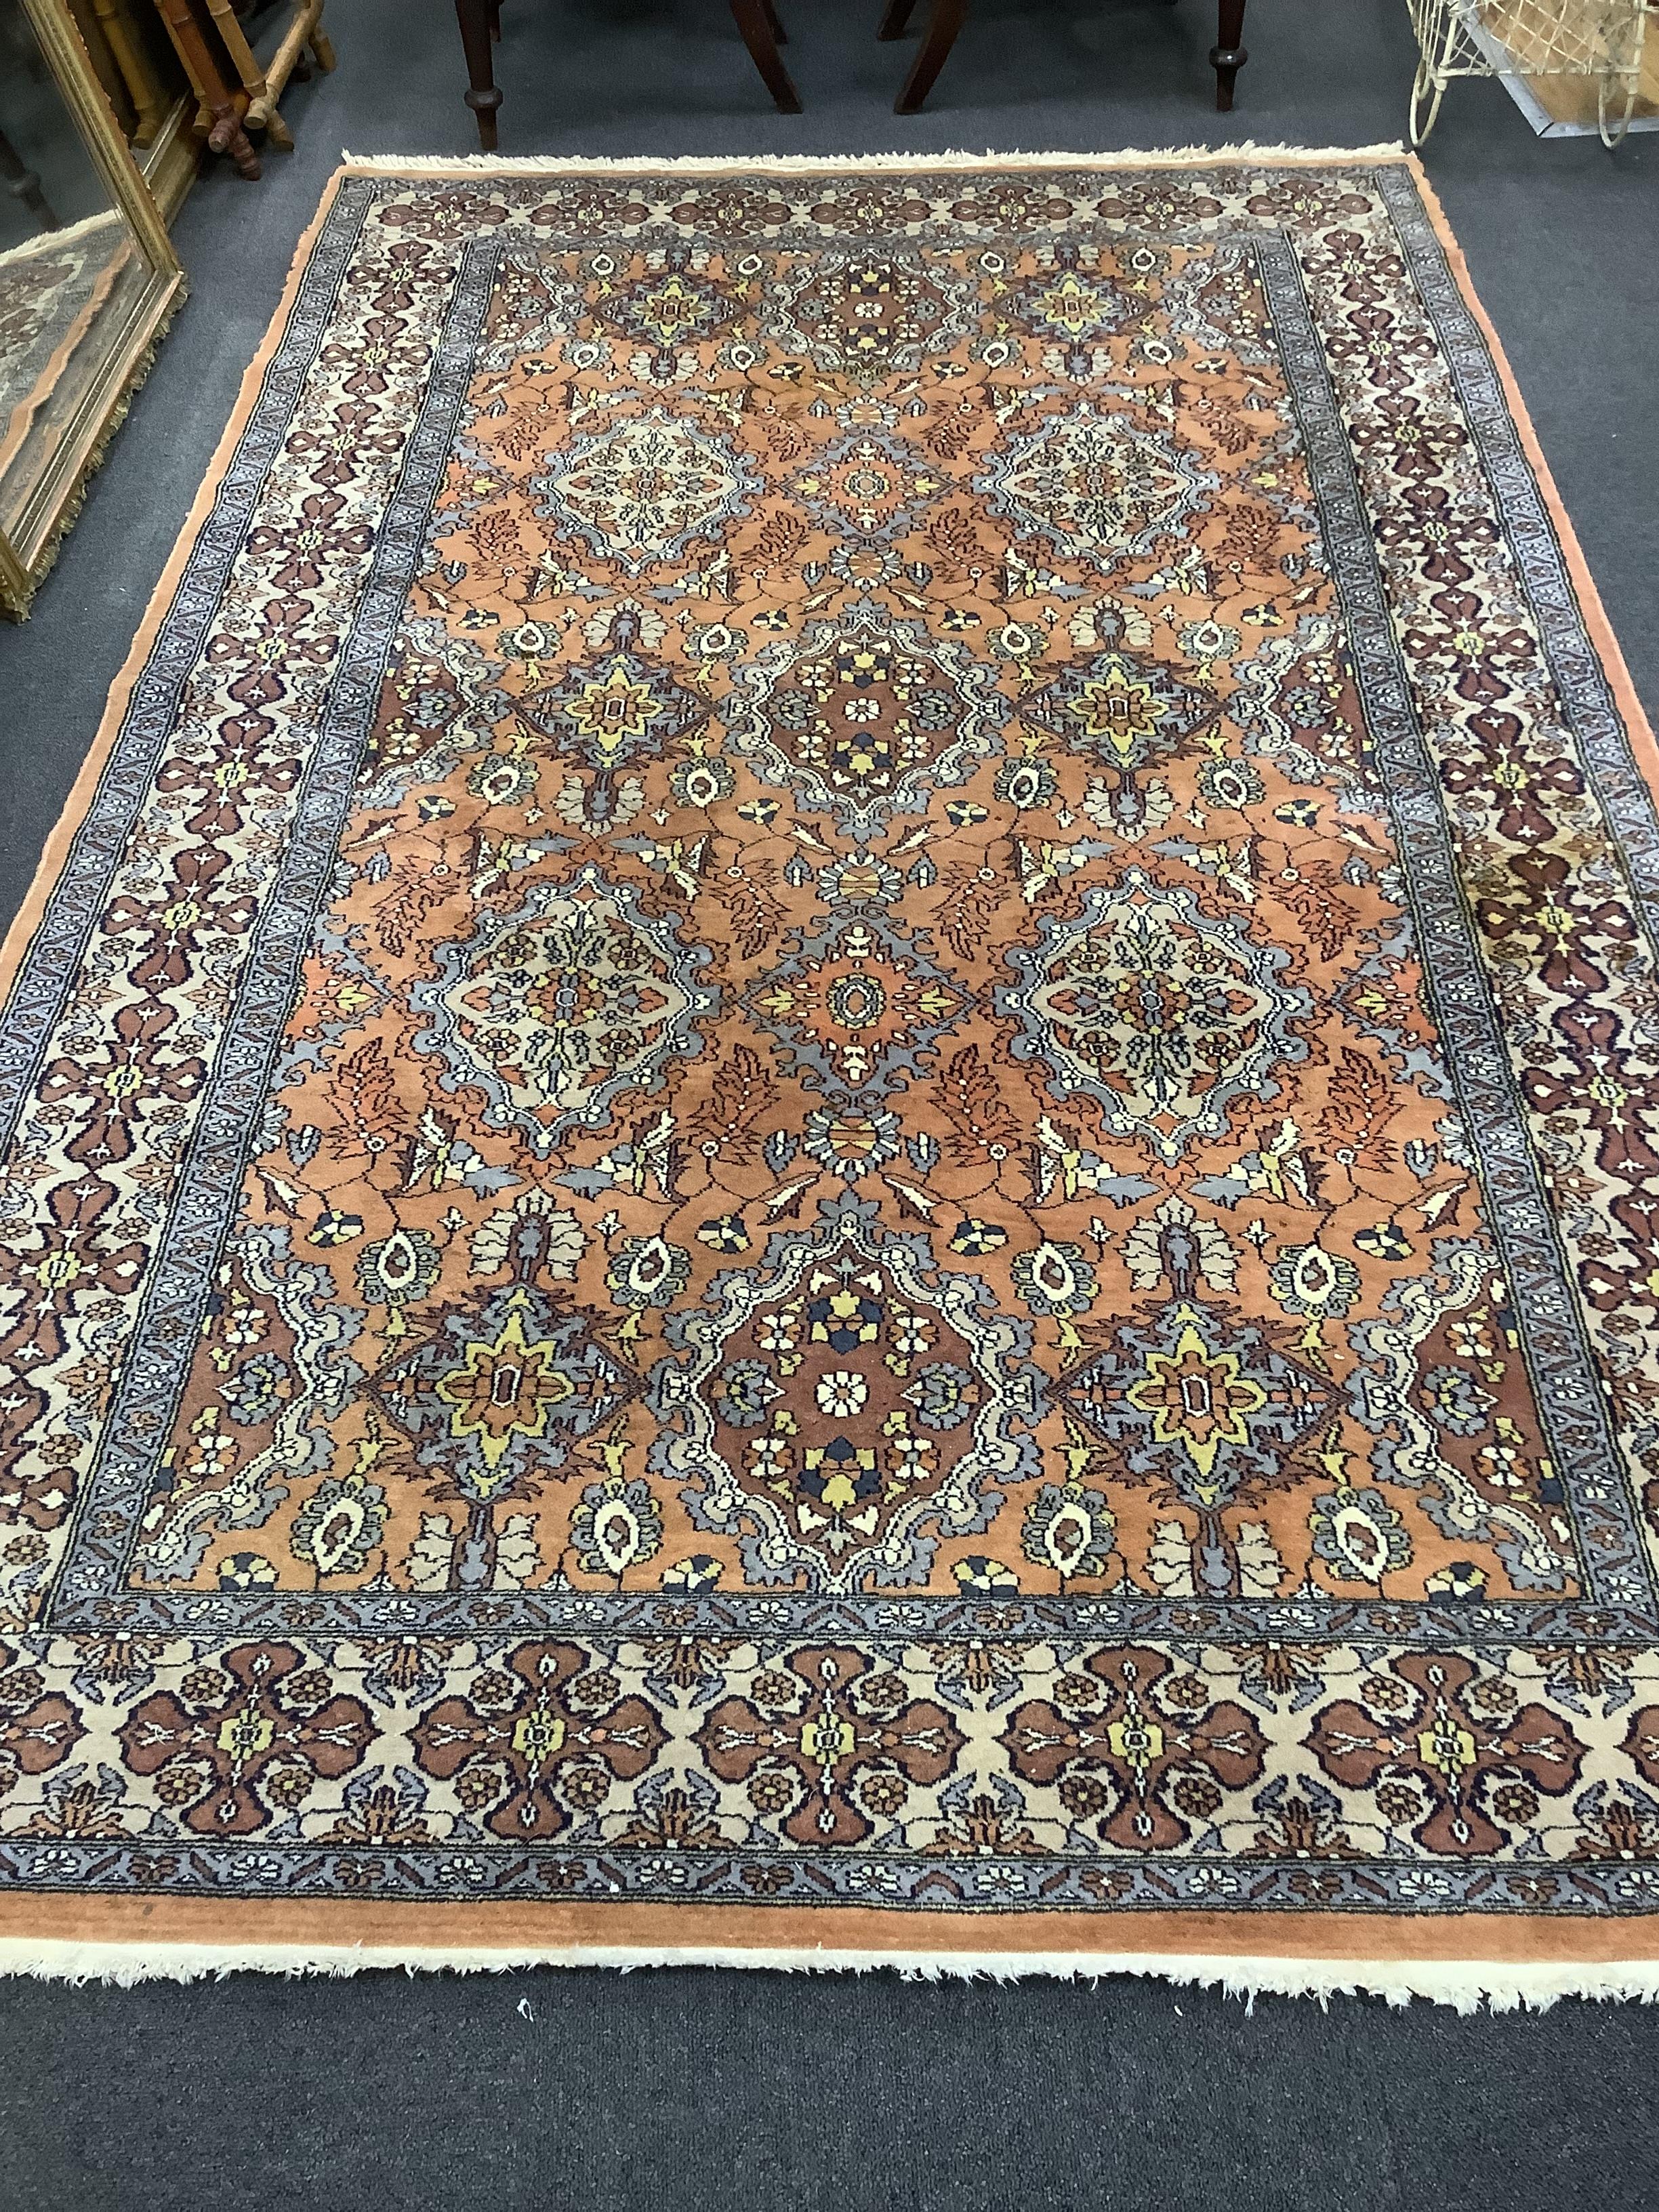 A North West Persian style pale red ground carpet, 250 x 154cm